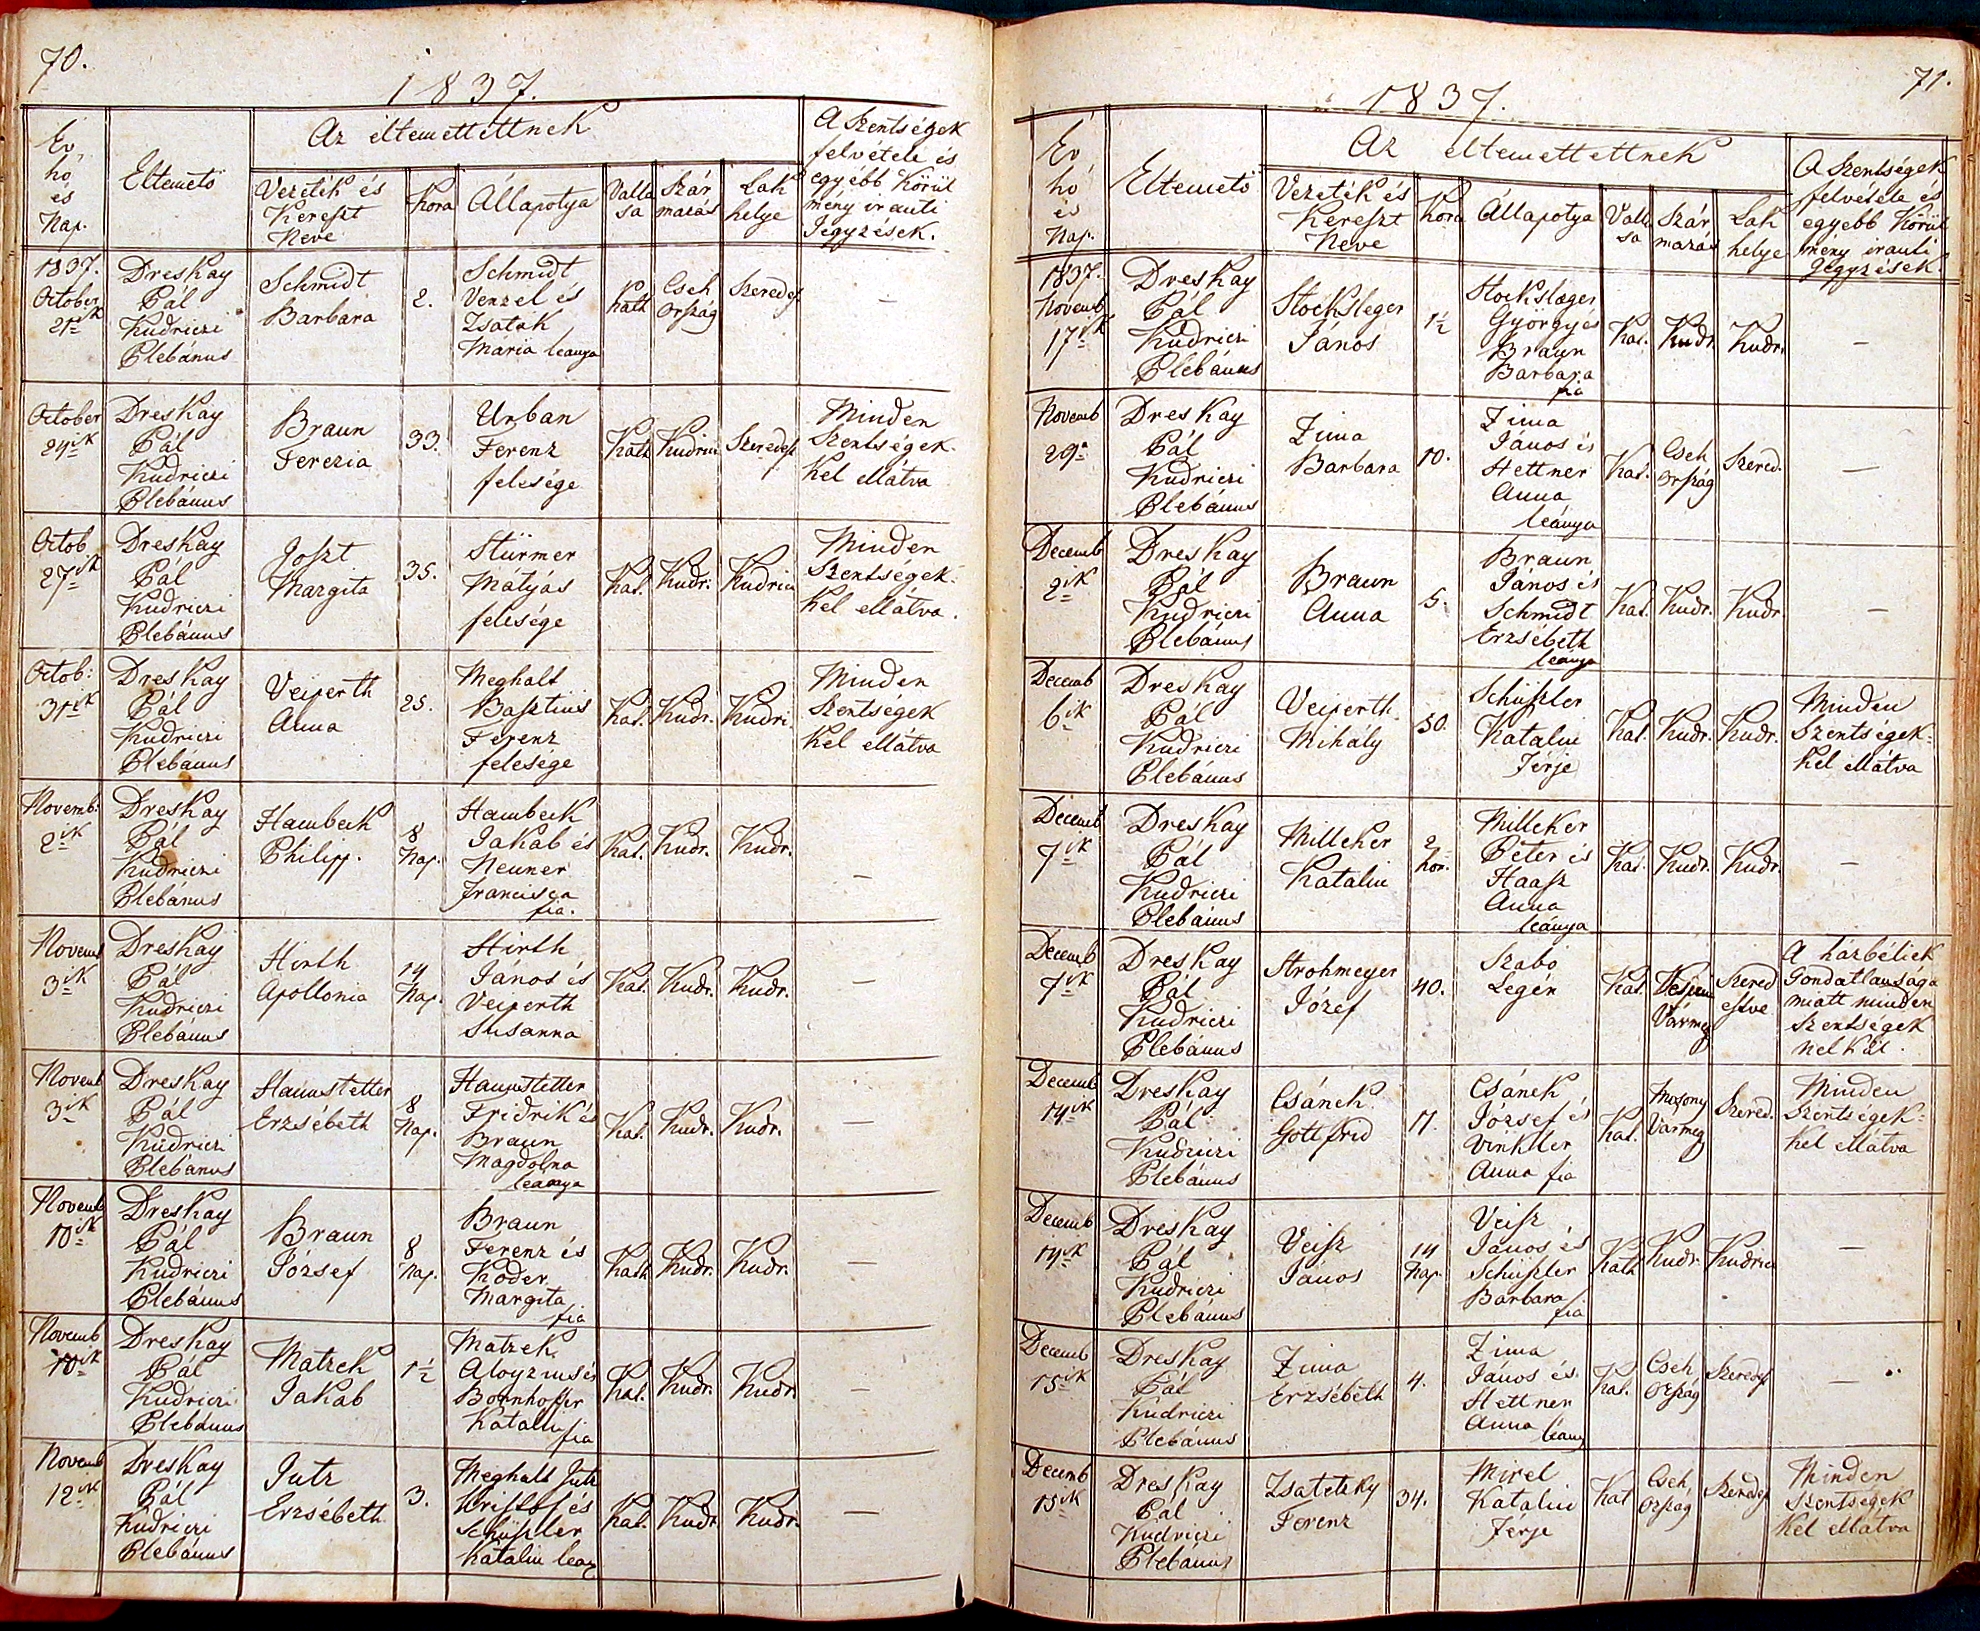 images/church_records/DEATHS/1829-1851D/070 i 071